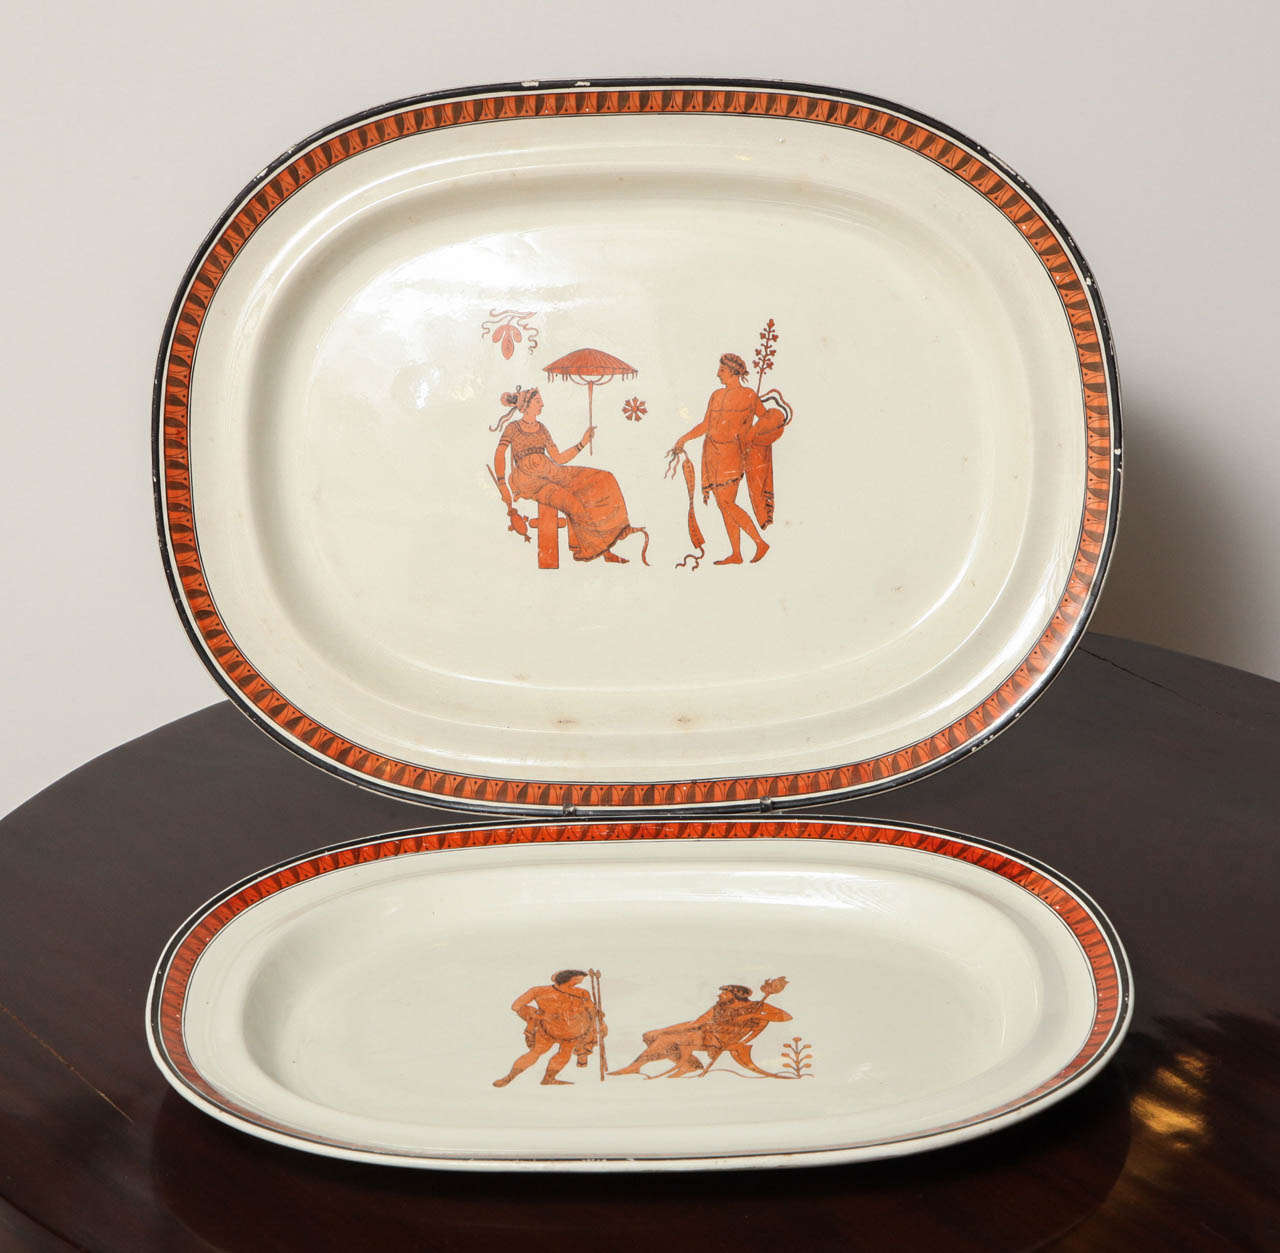 Two Early 19th Century Creamware Platters in the Etruscan Style